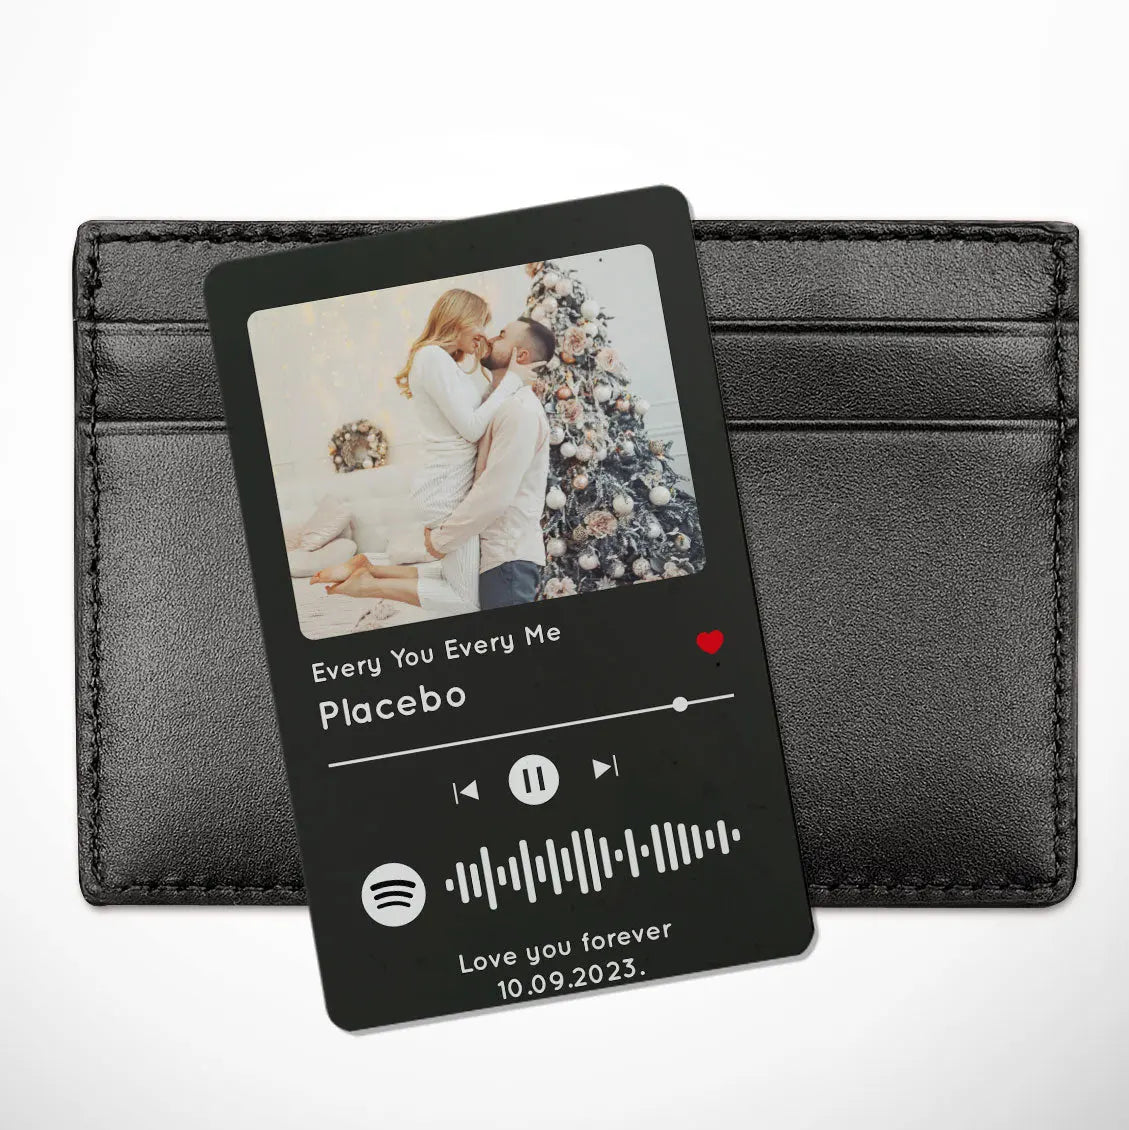 Personalised Spotify Wallet Insert Keepsake Photo Card Customise with your own Song and text - CushionPop